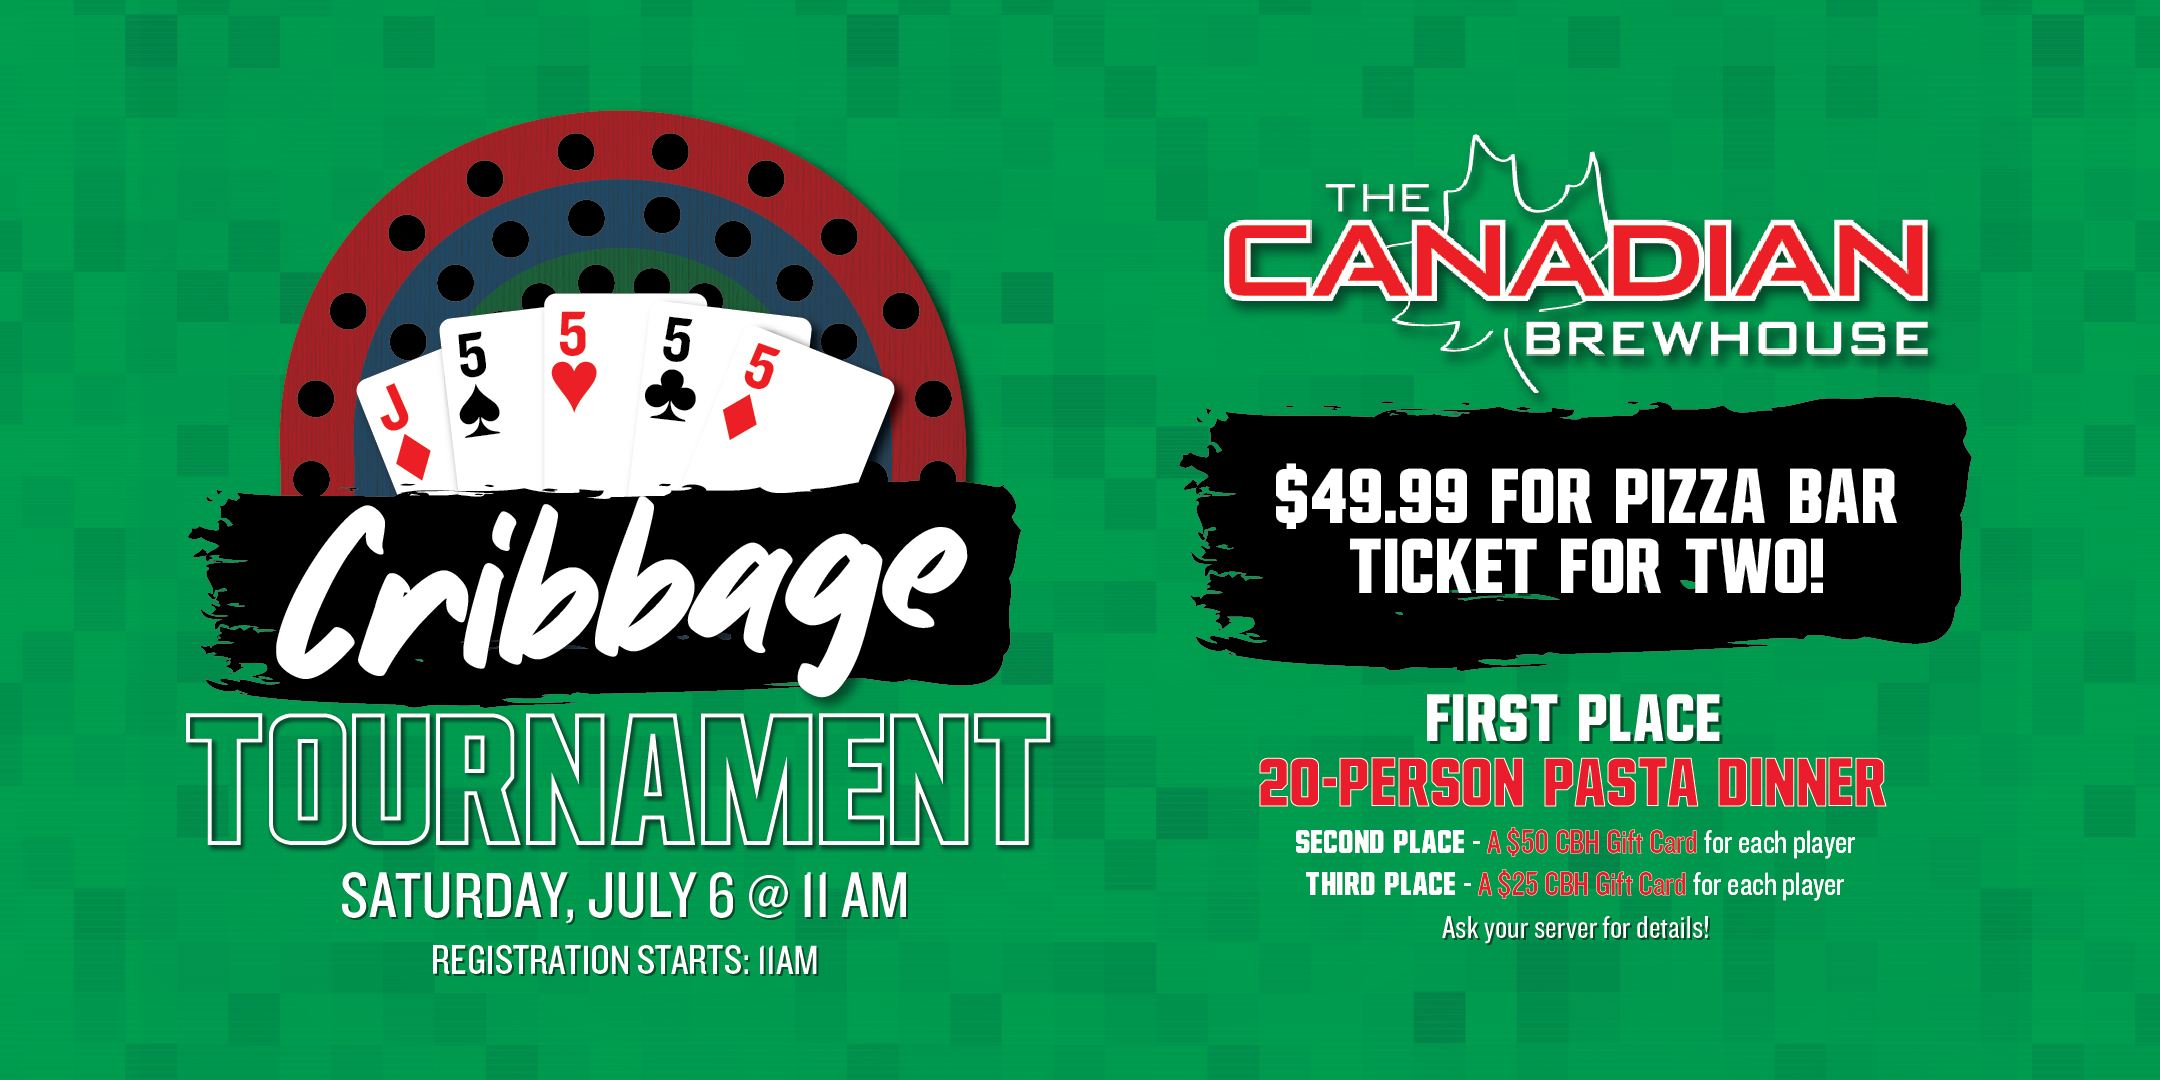 Cribbage Tournament at CBH Prince George. Saturday, July 6 at 11am. Registration starts: 11am. $49.99 for pizza bar ticket for two!